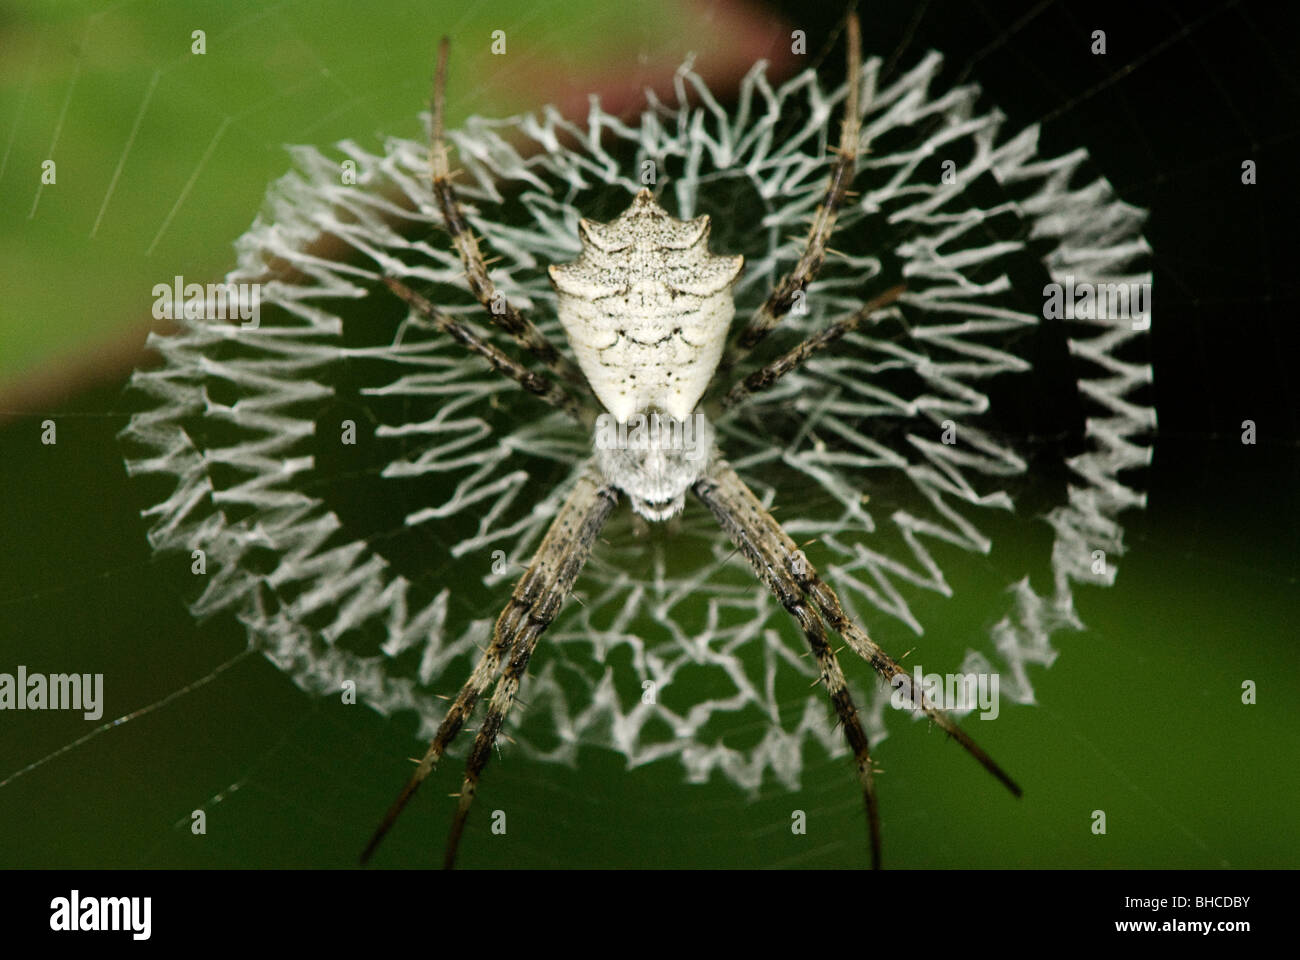 Argiope spider photographed in Tanzania, Africa. Stock Photo